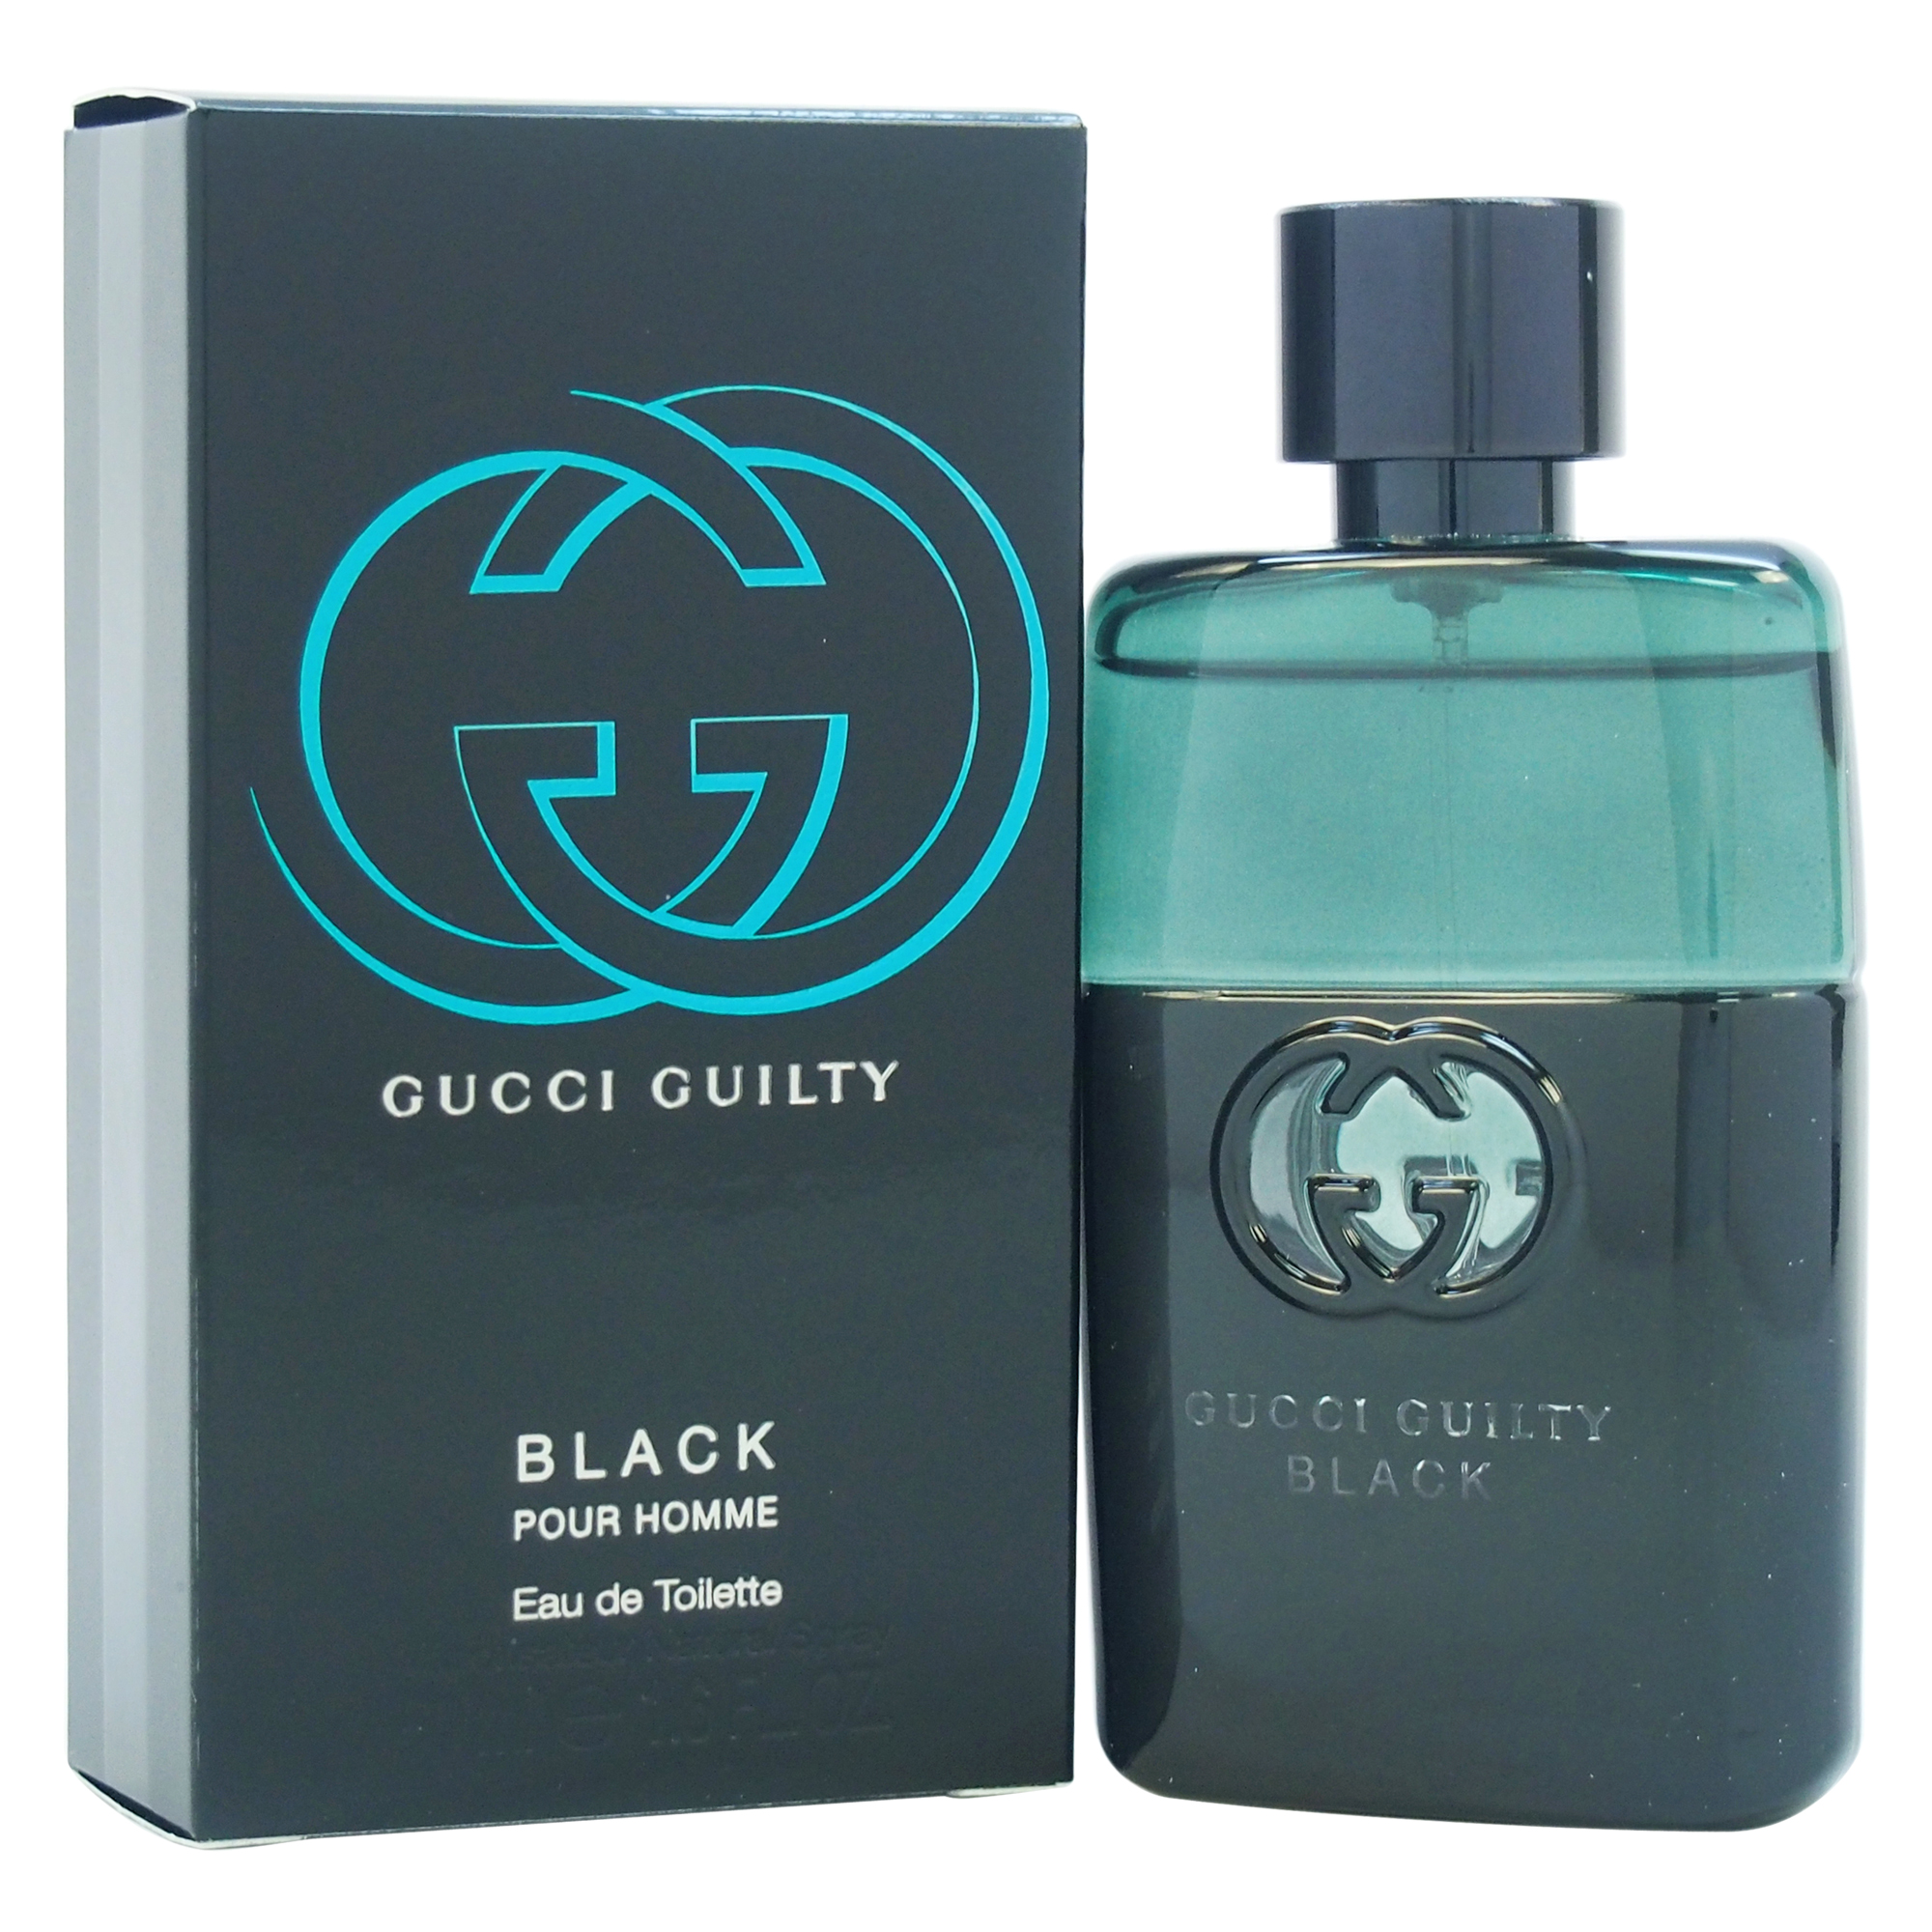 Gucci Guilty Black Pour Homme by  for Men - 1.6 oz EDT Spray